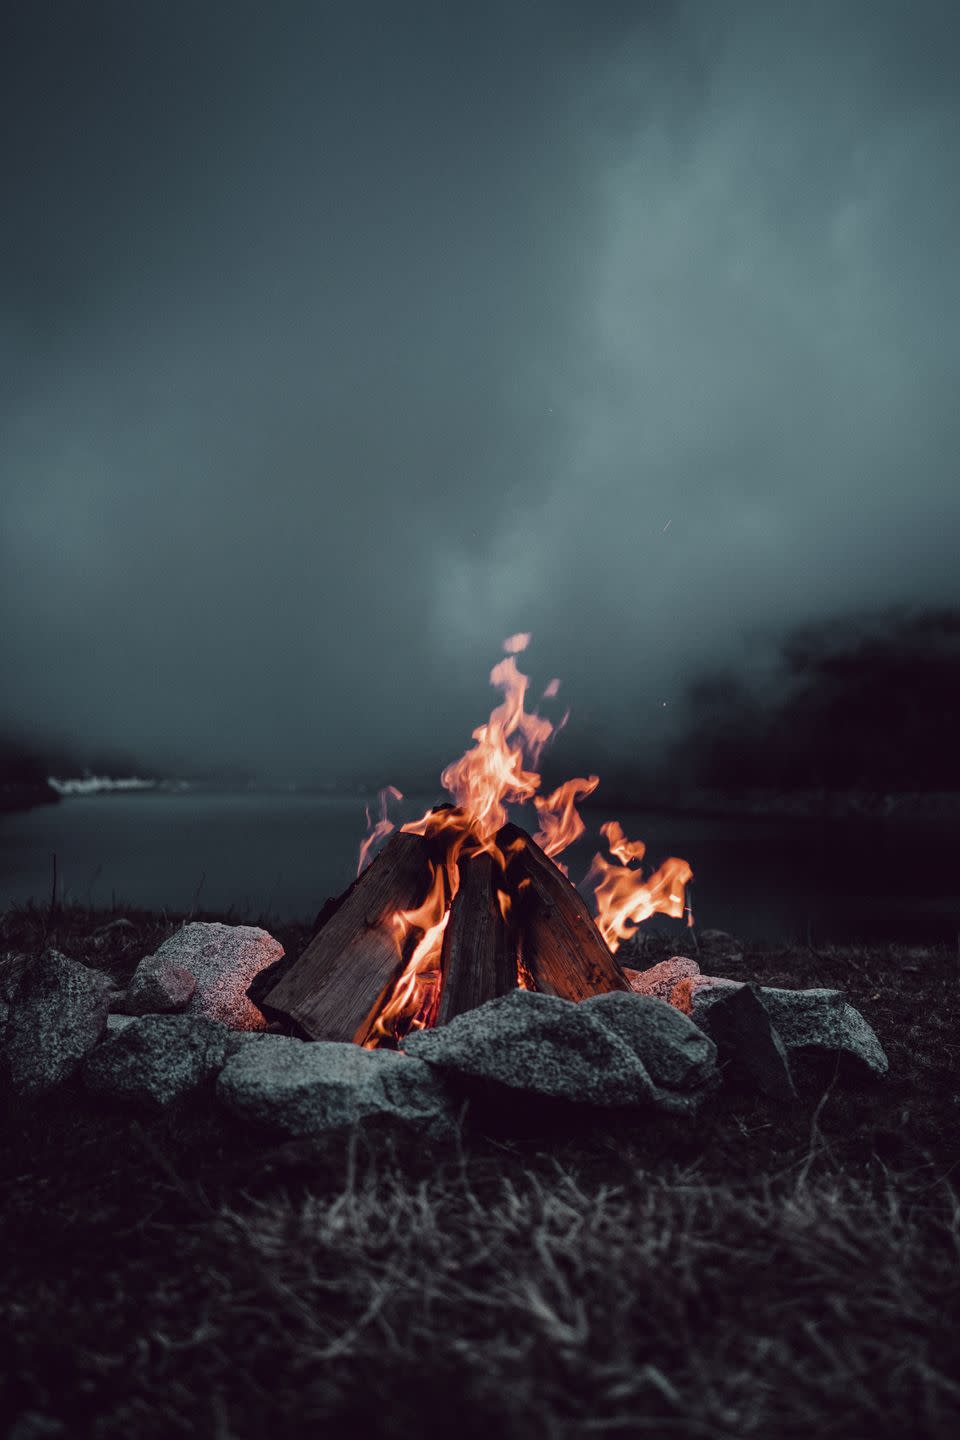 <p>Level up your dating game with this offering that provides a seriously snug ambiance combined with the hypnotic effects of fire. Toss some s'mores into the equation and you're set. (You can thank us if you and your date end up cuddling under a blanket together.)</p>